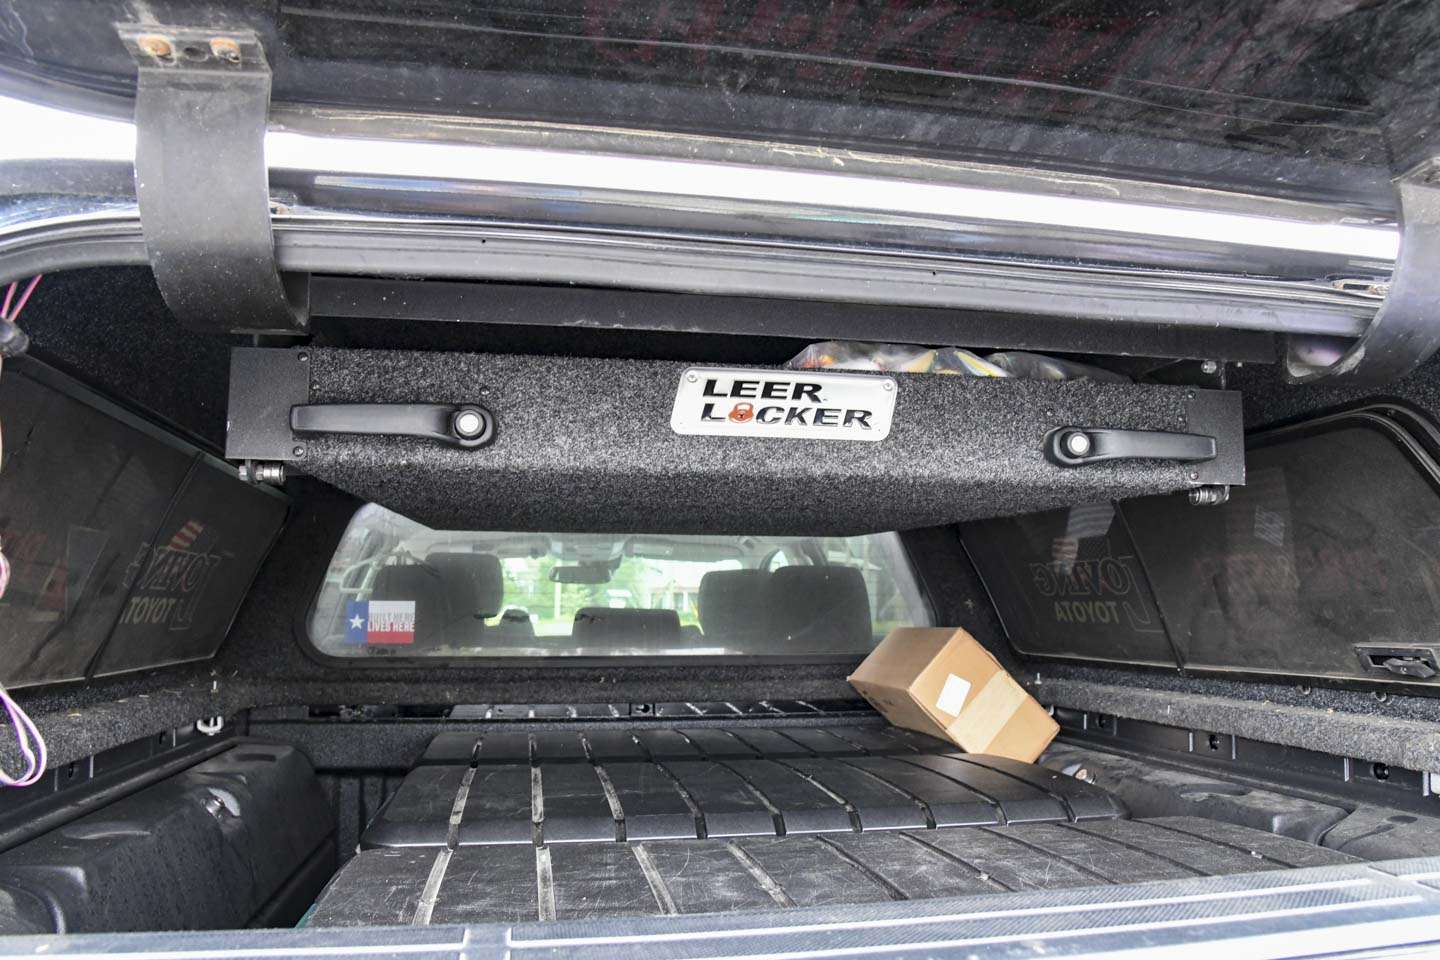 Combs added aftermarket storage systems to the bed of the truck to organize his equipment.